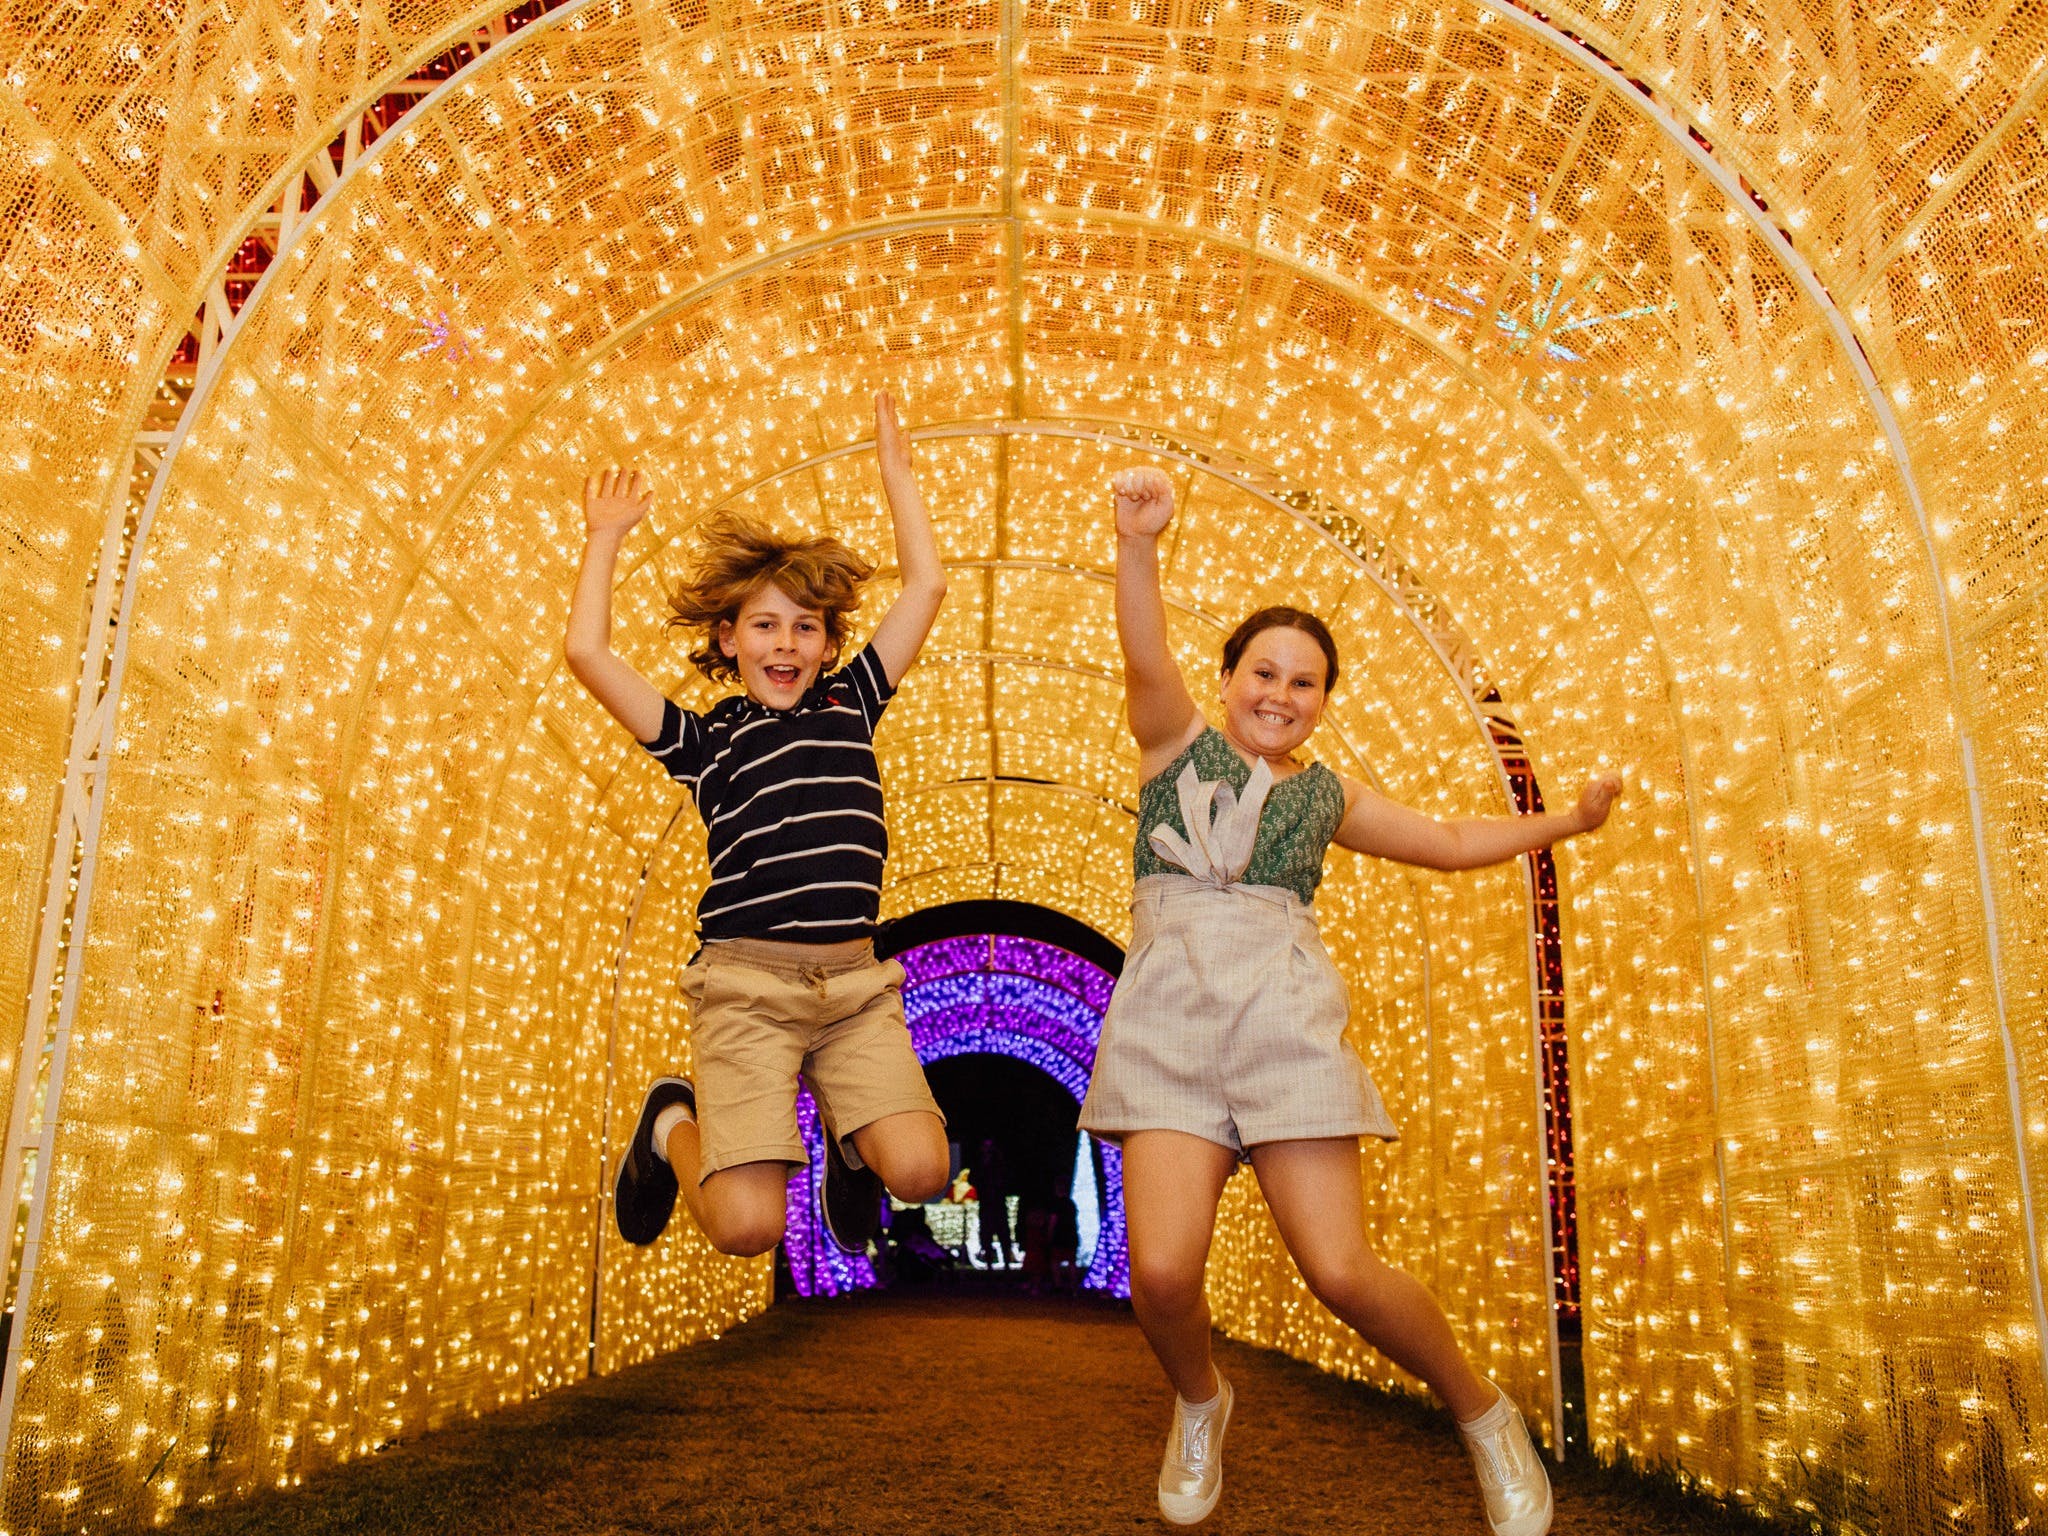 Christmas Lights Spectacular New Year's Eve at Hunter Valley Gardens - Melbourne Tourism